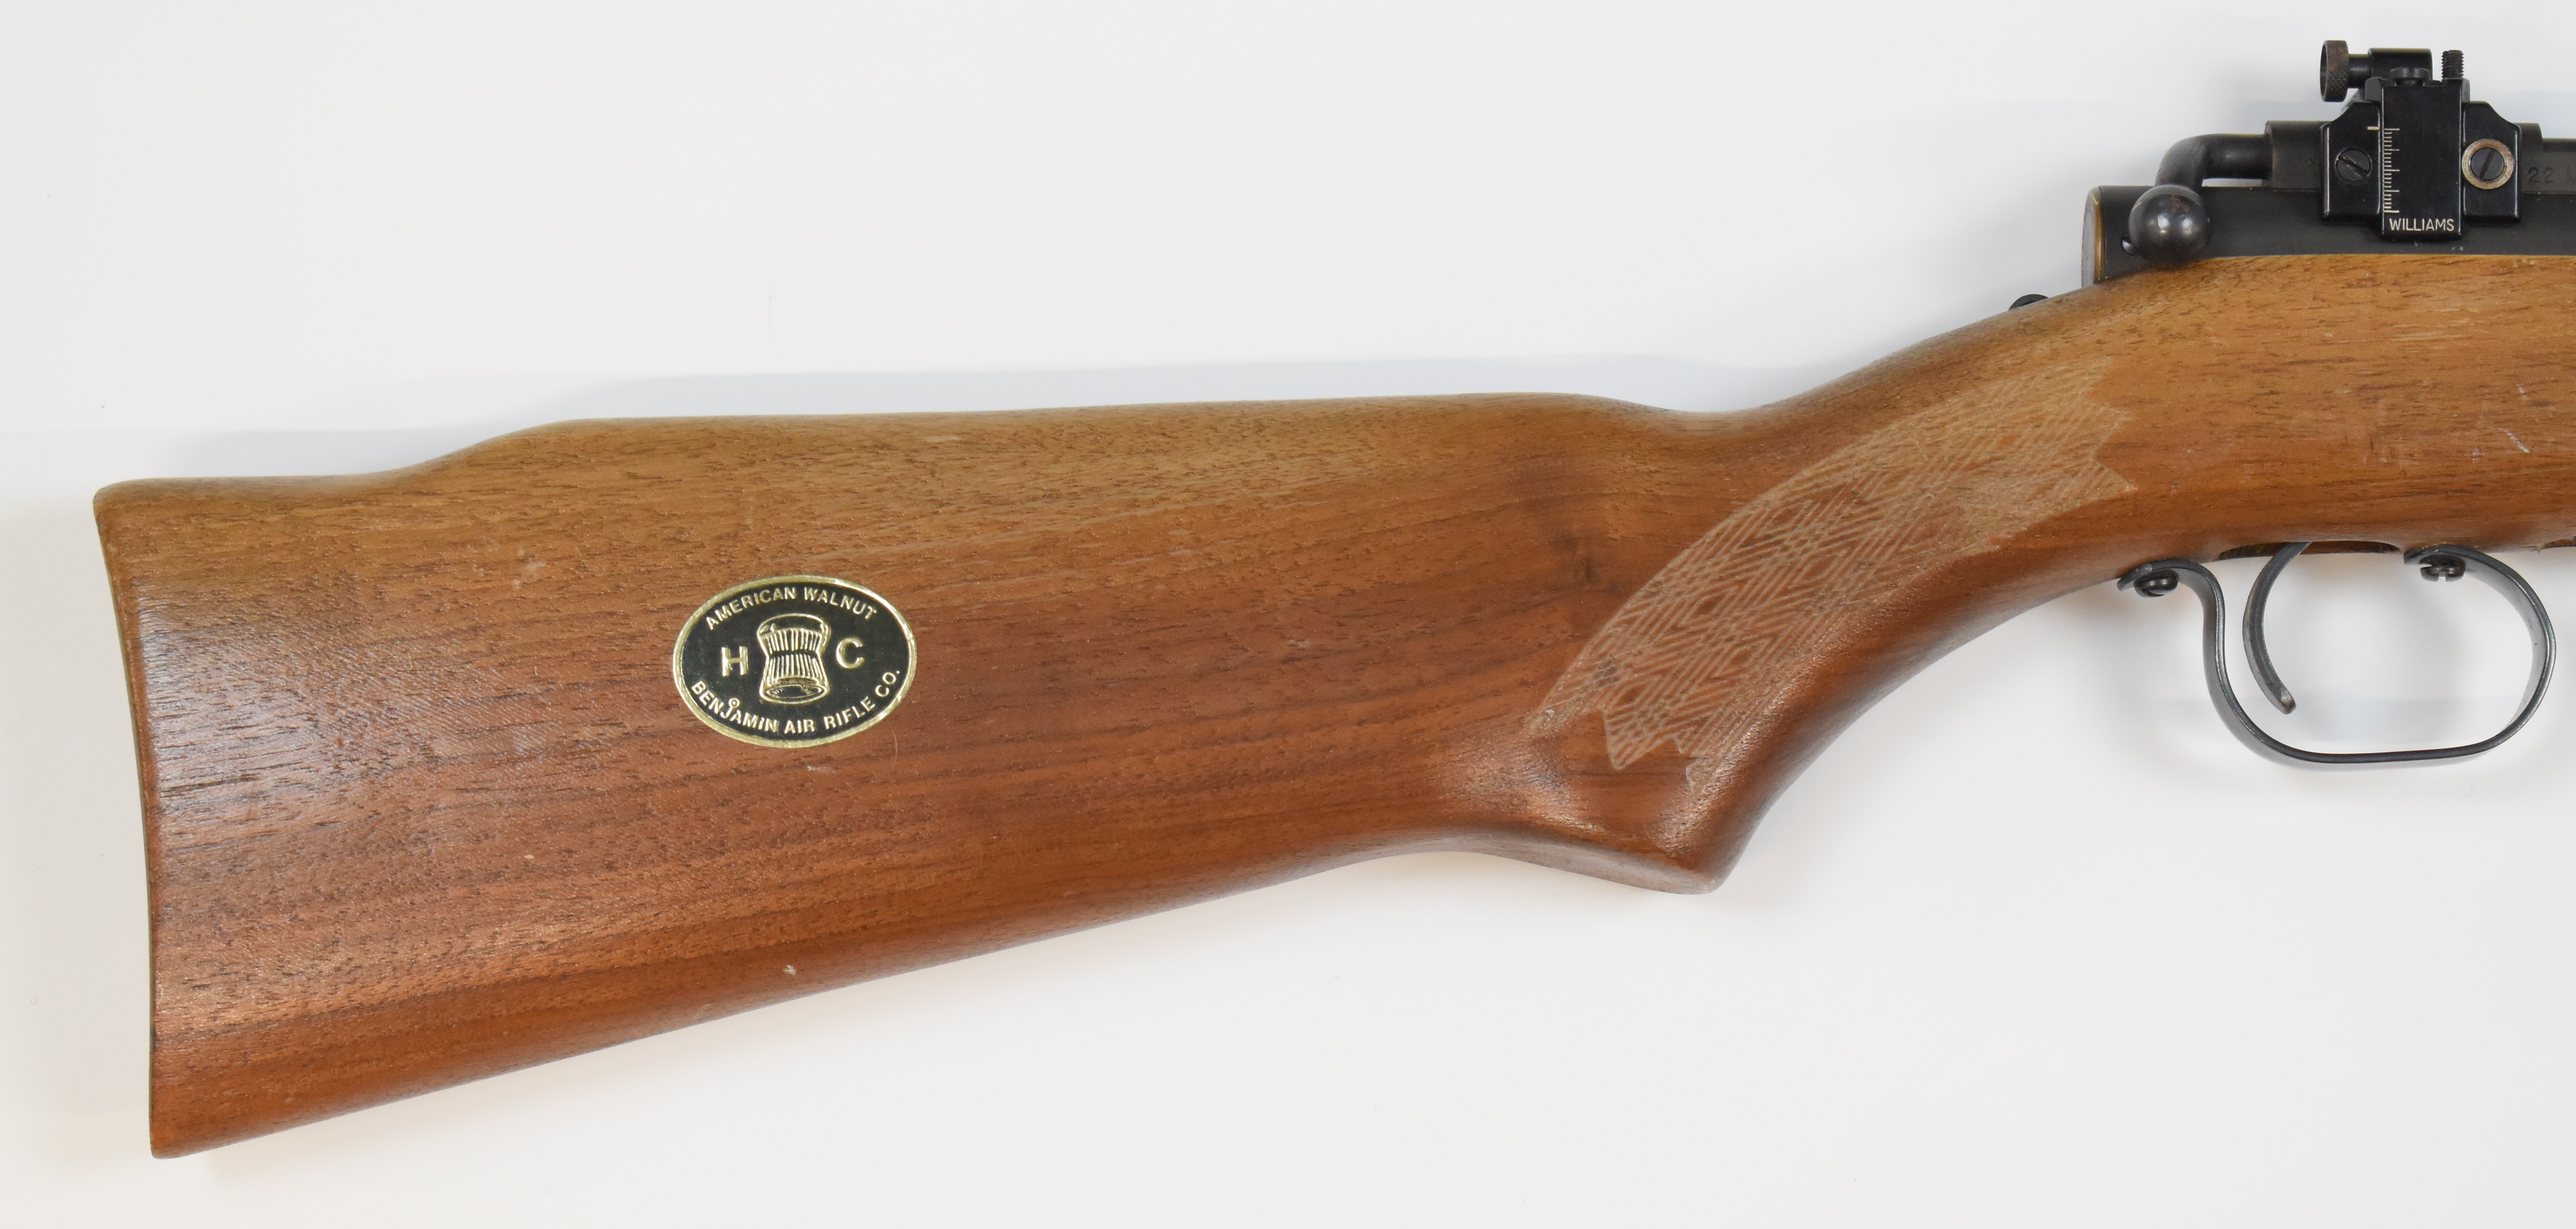 Benjamin Franklin Model 342 .22 under-lever bolt-action air rifle with adjustable sights and - Image 3 of 10